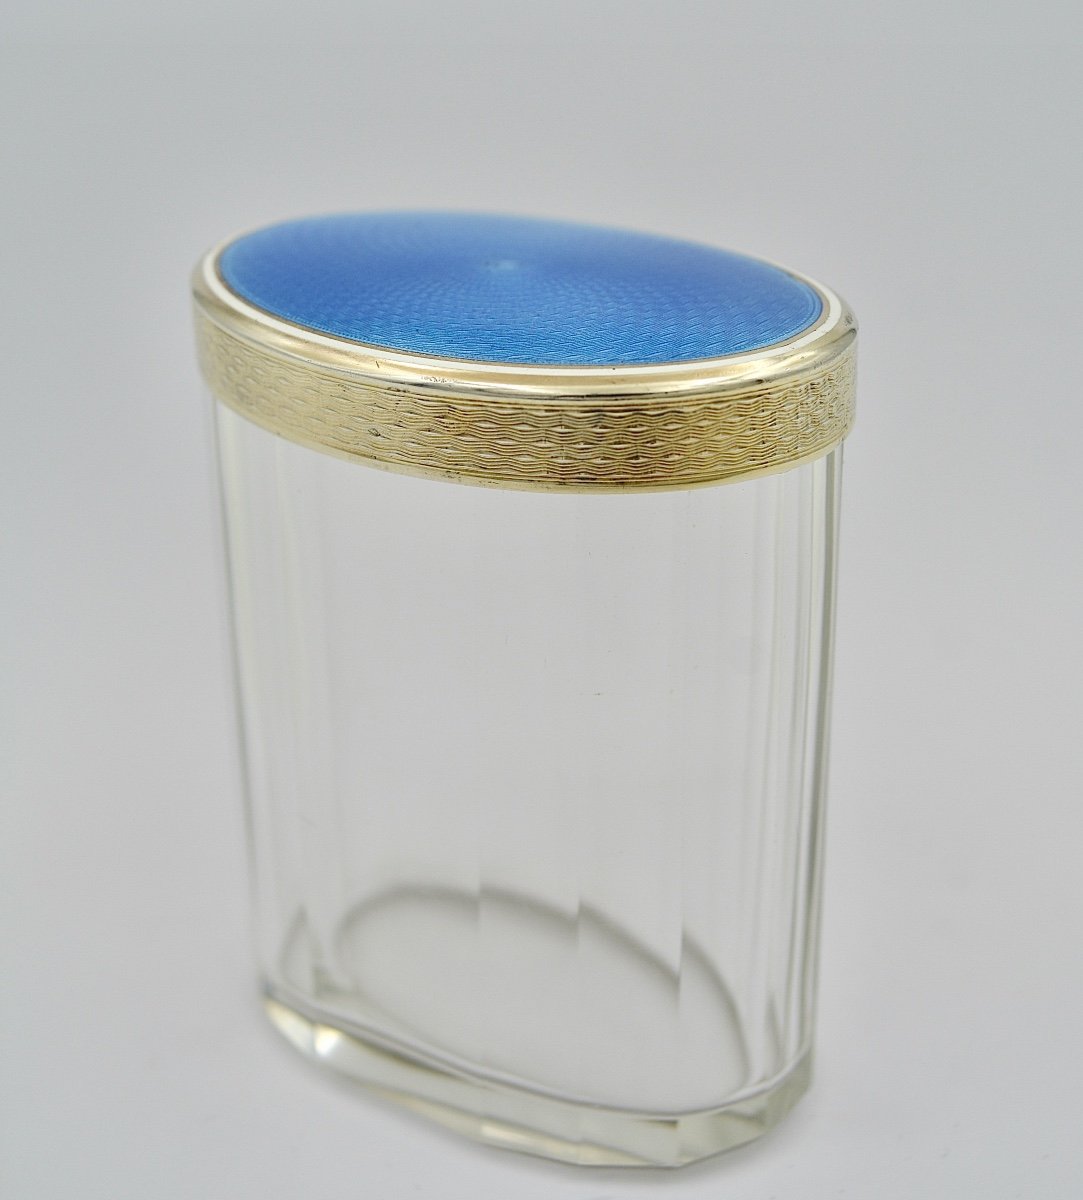 Art Deco Period. Glass And Silver Blue Enamel Toilet Box, France